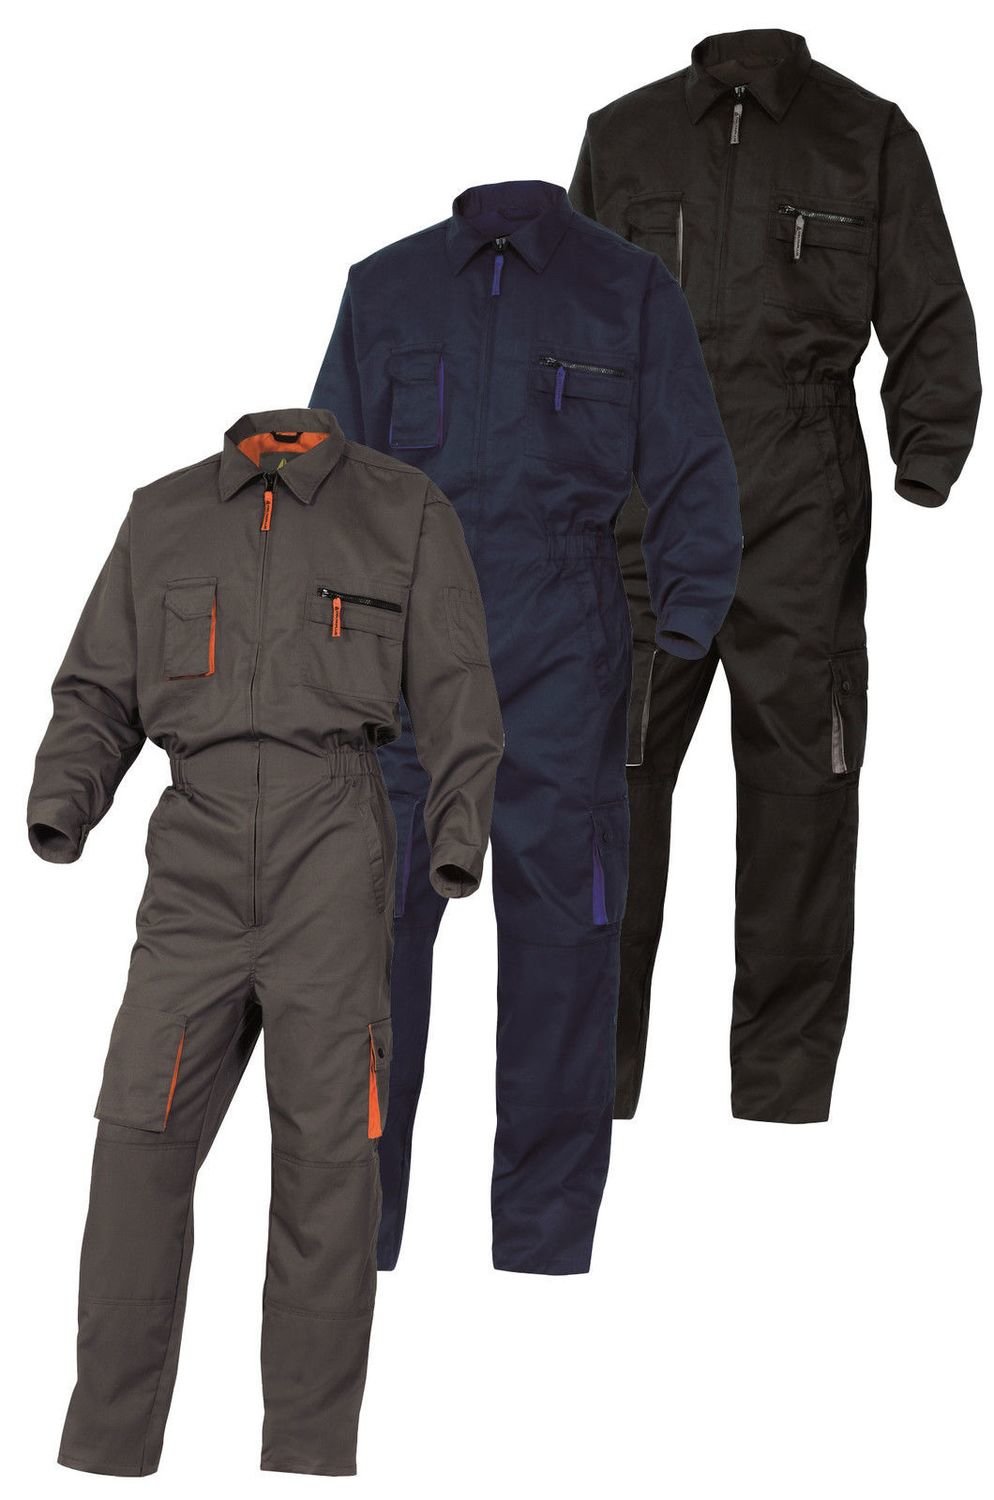 Protective Suits & Coveralls Business Delta Plus Panoply M2CZ2 Mach 2 ...